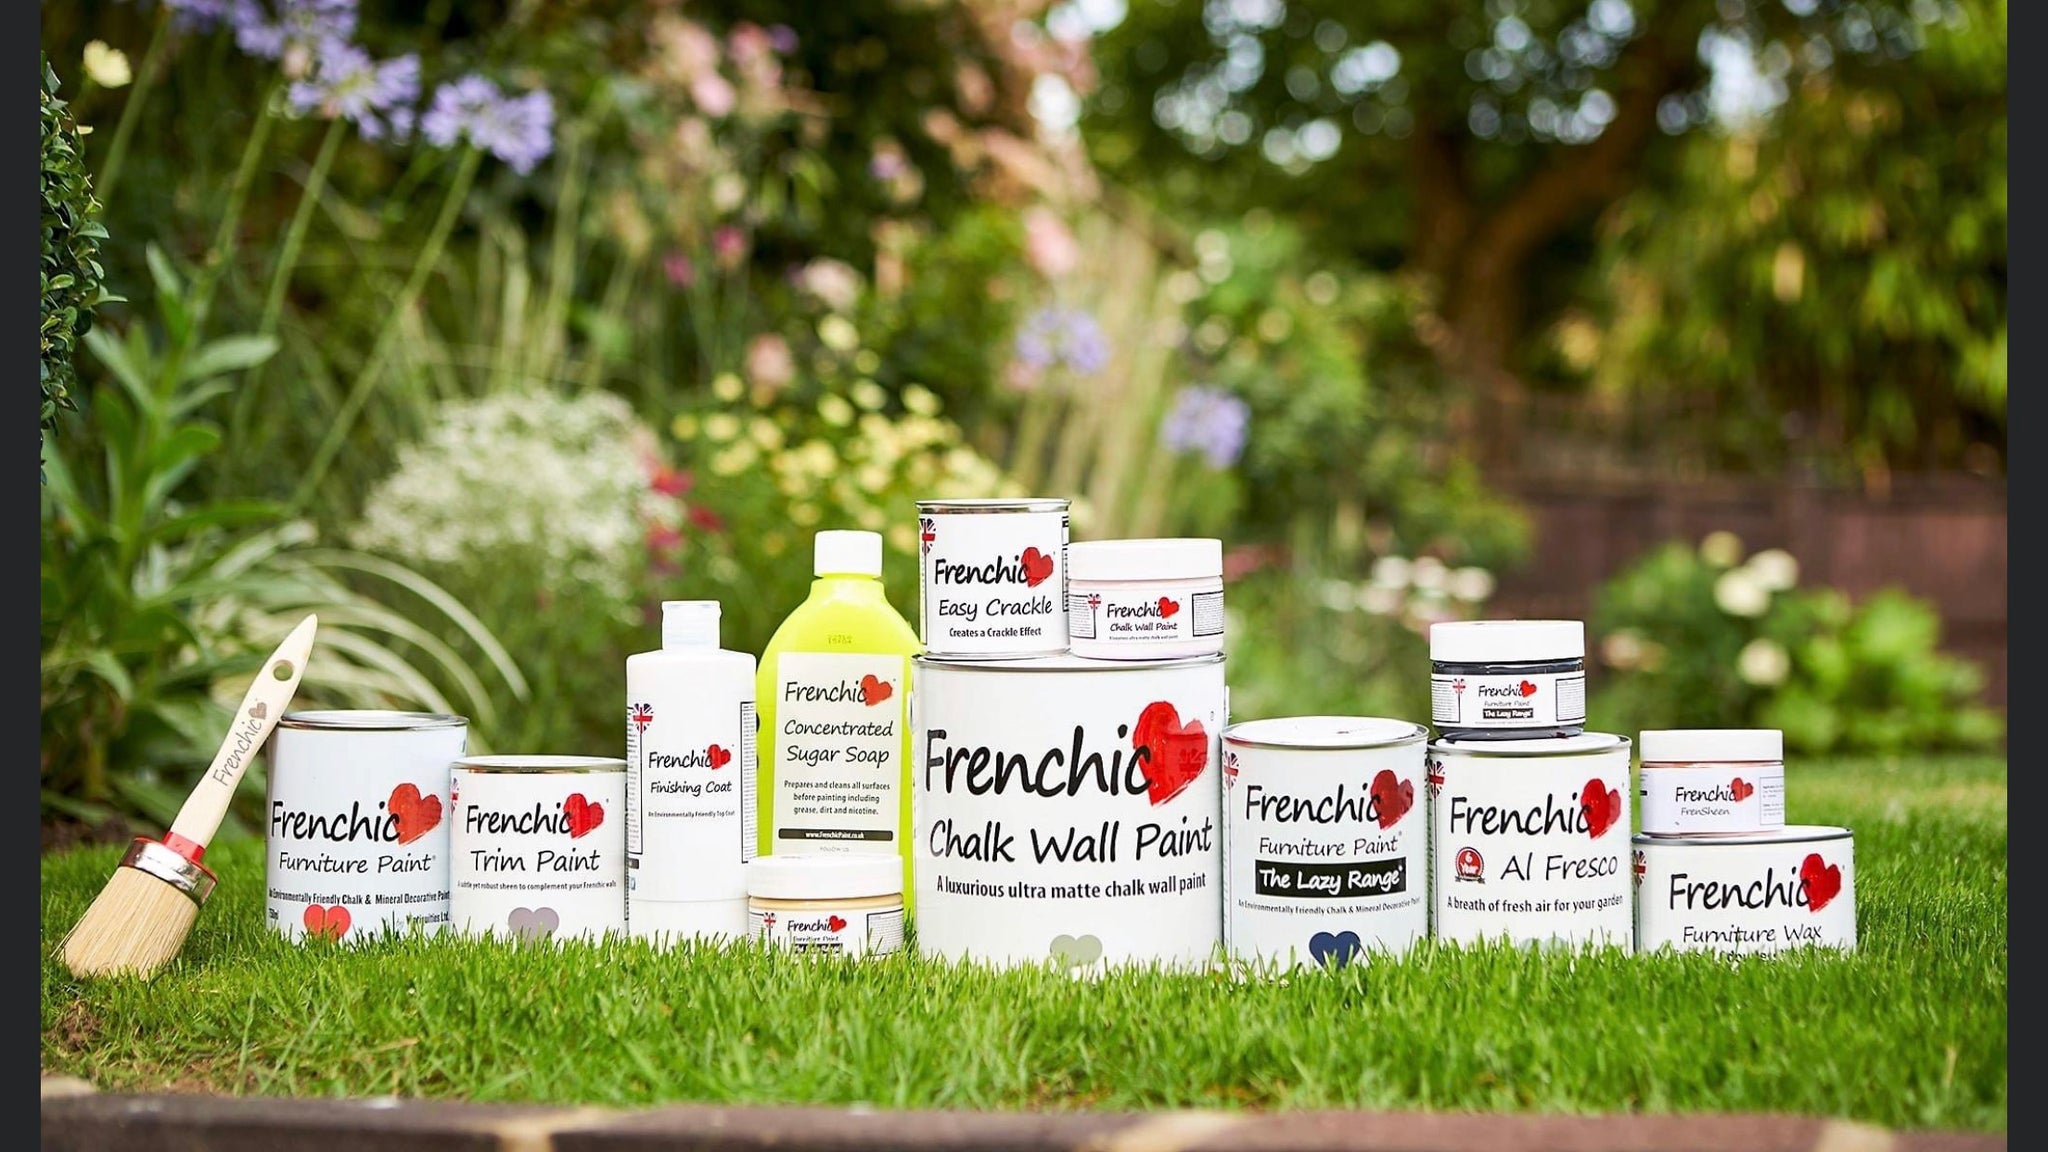 Introducing the Frenchic Ranges